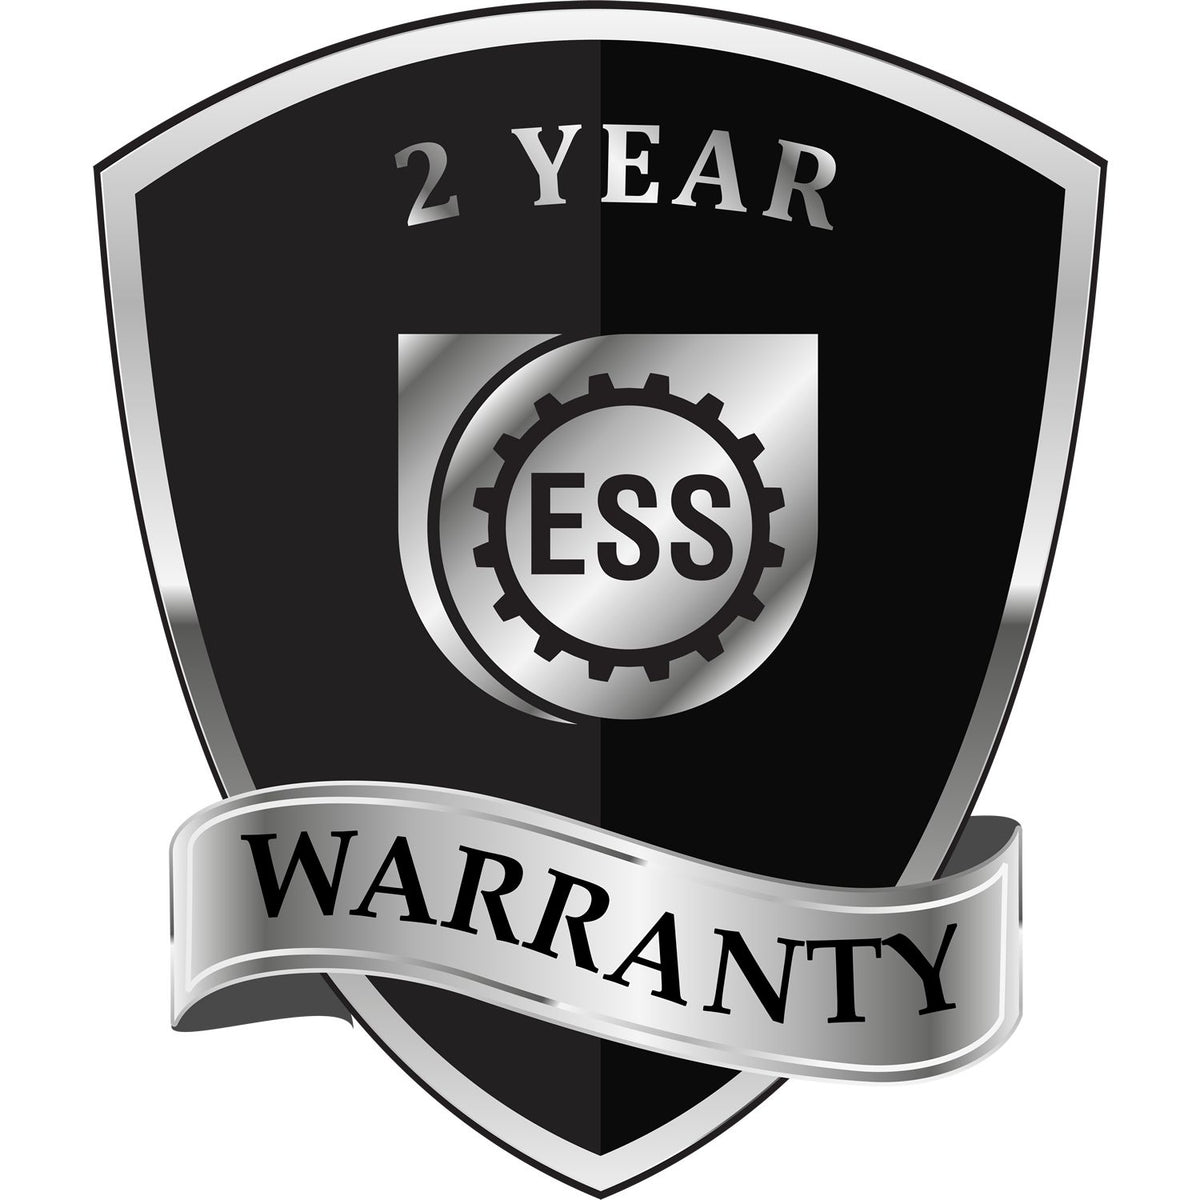 A black and silver badge or emblem showing warranty information for the Gift North Dakota Architect Seal